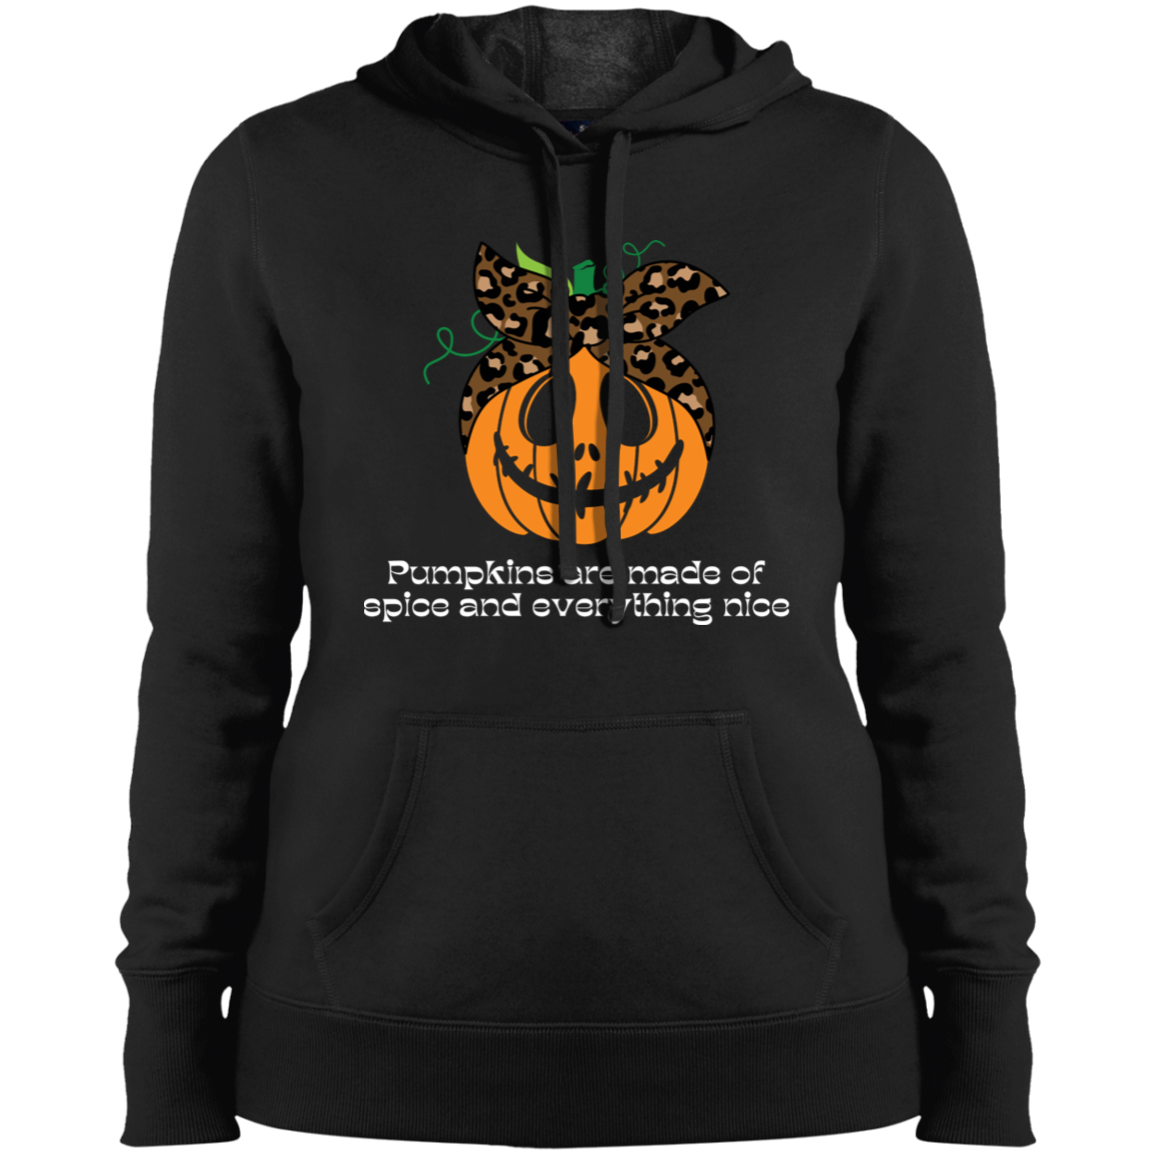 Pumpkins are made of spice and everything nice (1) LST254 Ladies' Pullover Hooded Sweatshirt